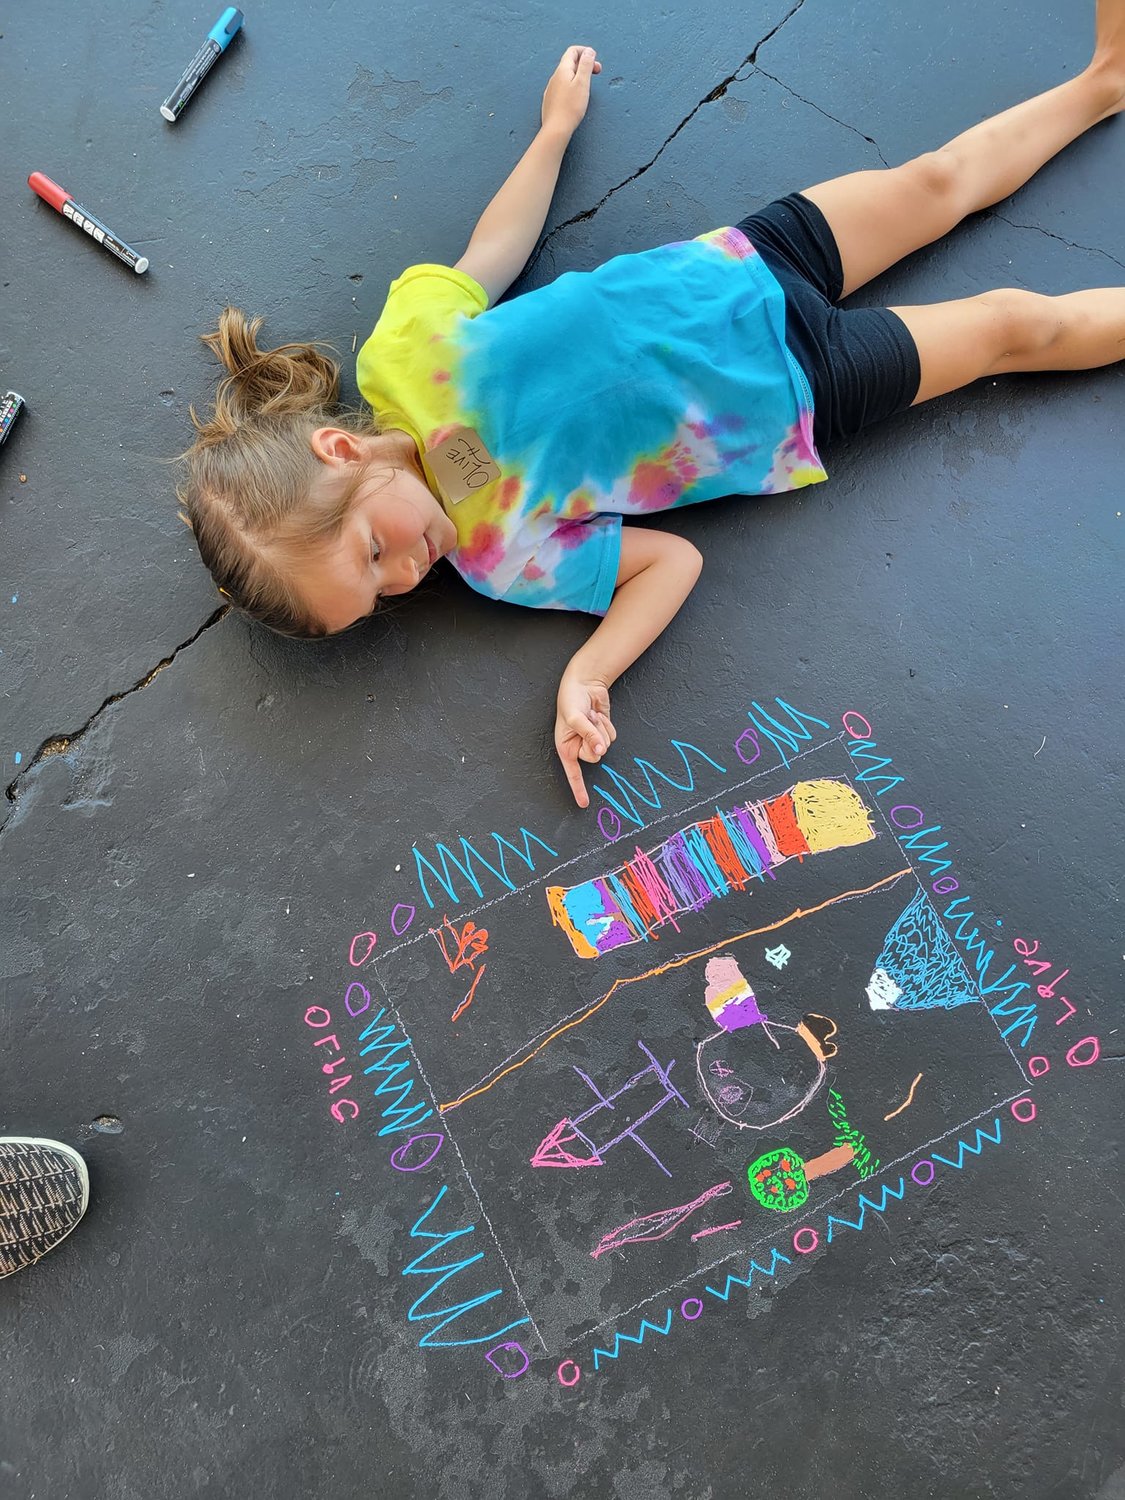 The first summer art class was held on Saturday, June 4 at Drowsy Poet @ The Foley Station. The theme for the class was Permanent Chalk Paintings.